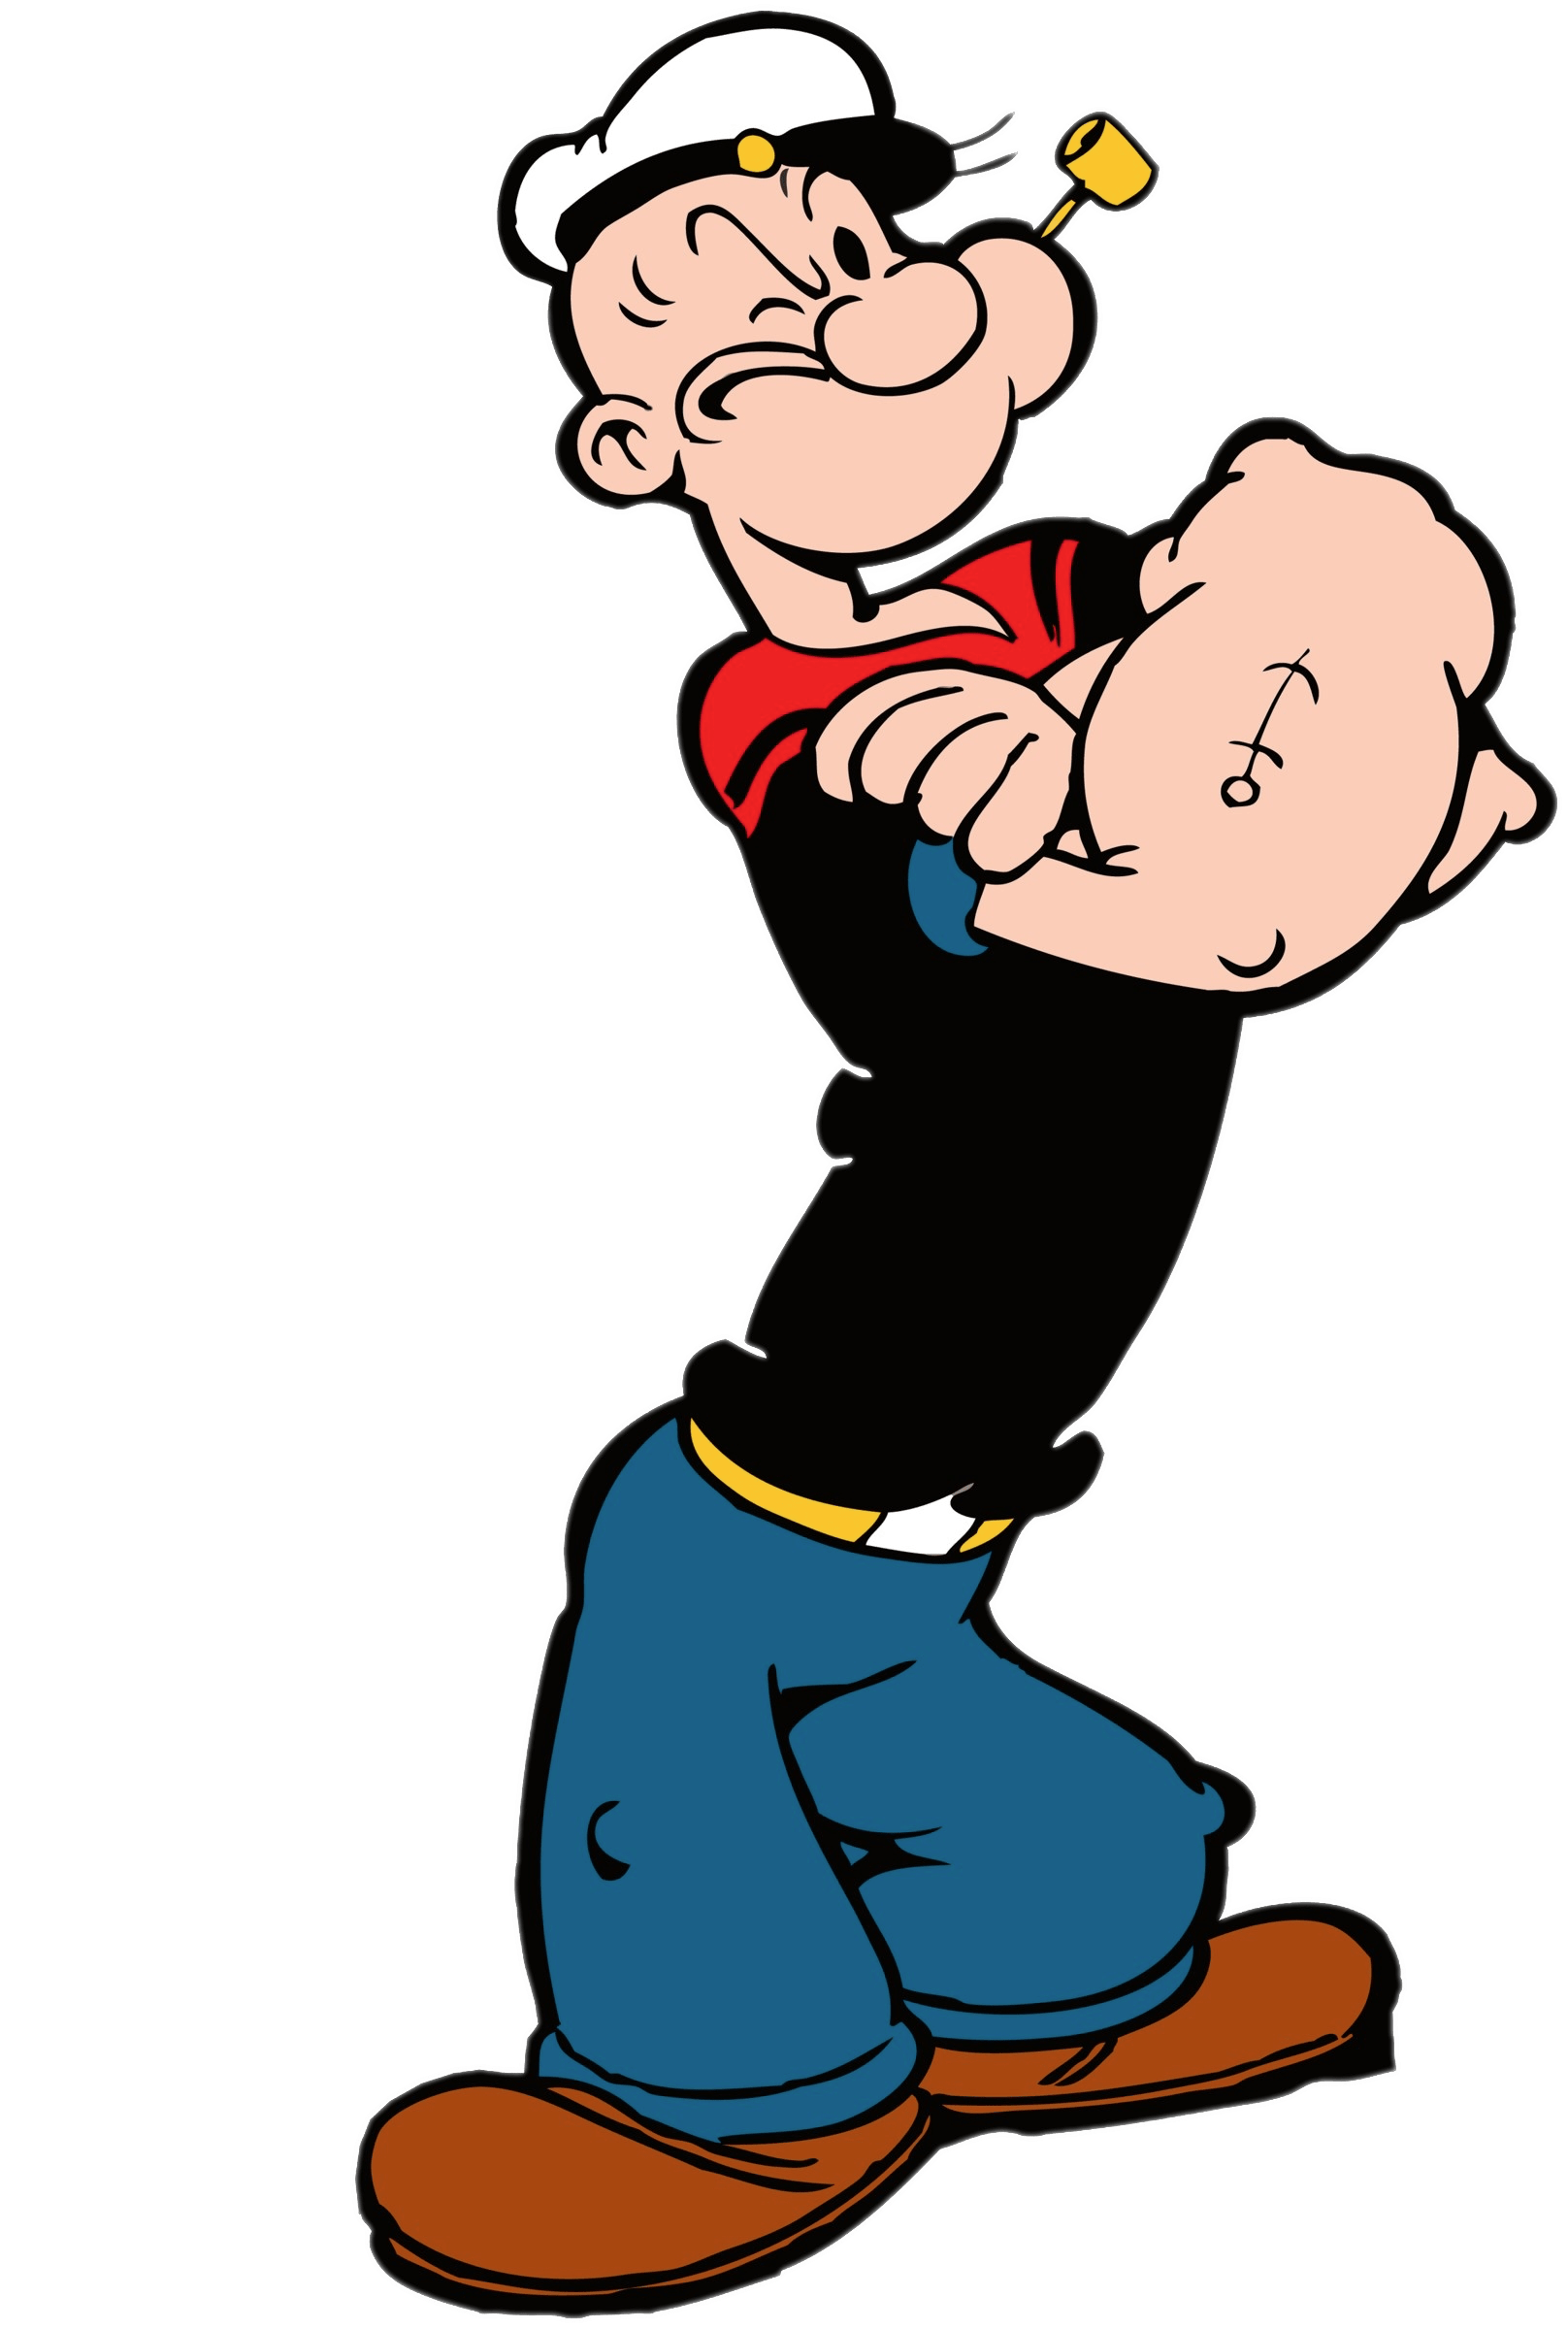 Arms crossed transparent png. Arm clipart popeye